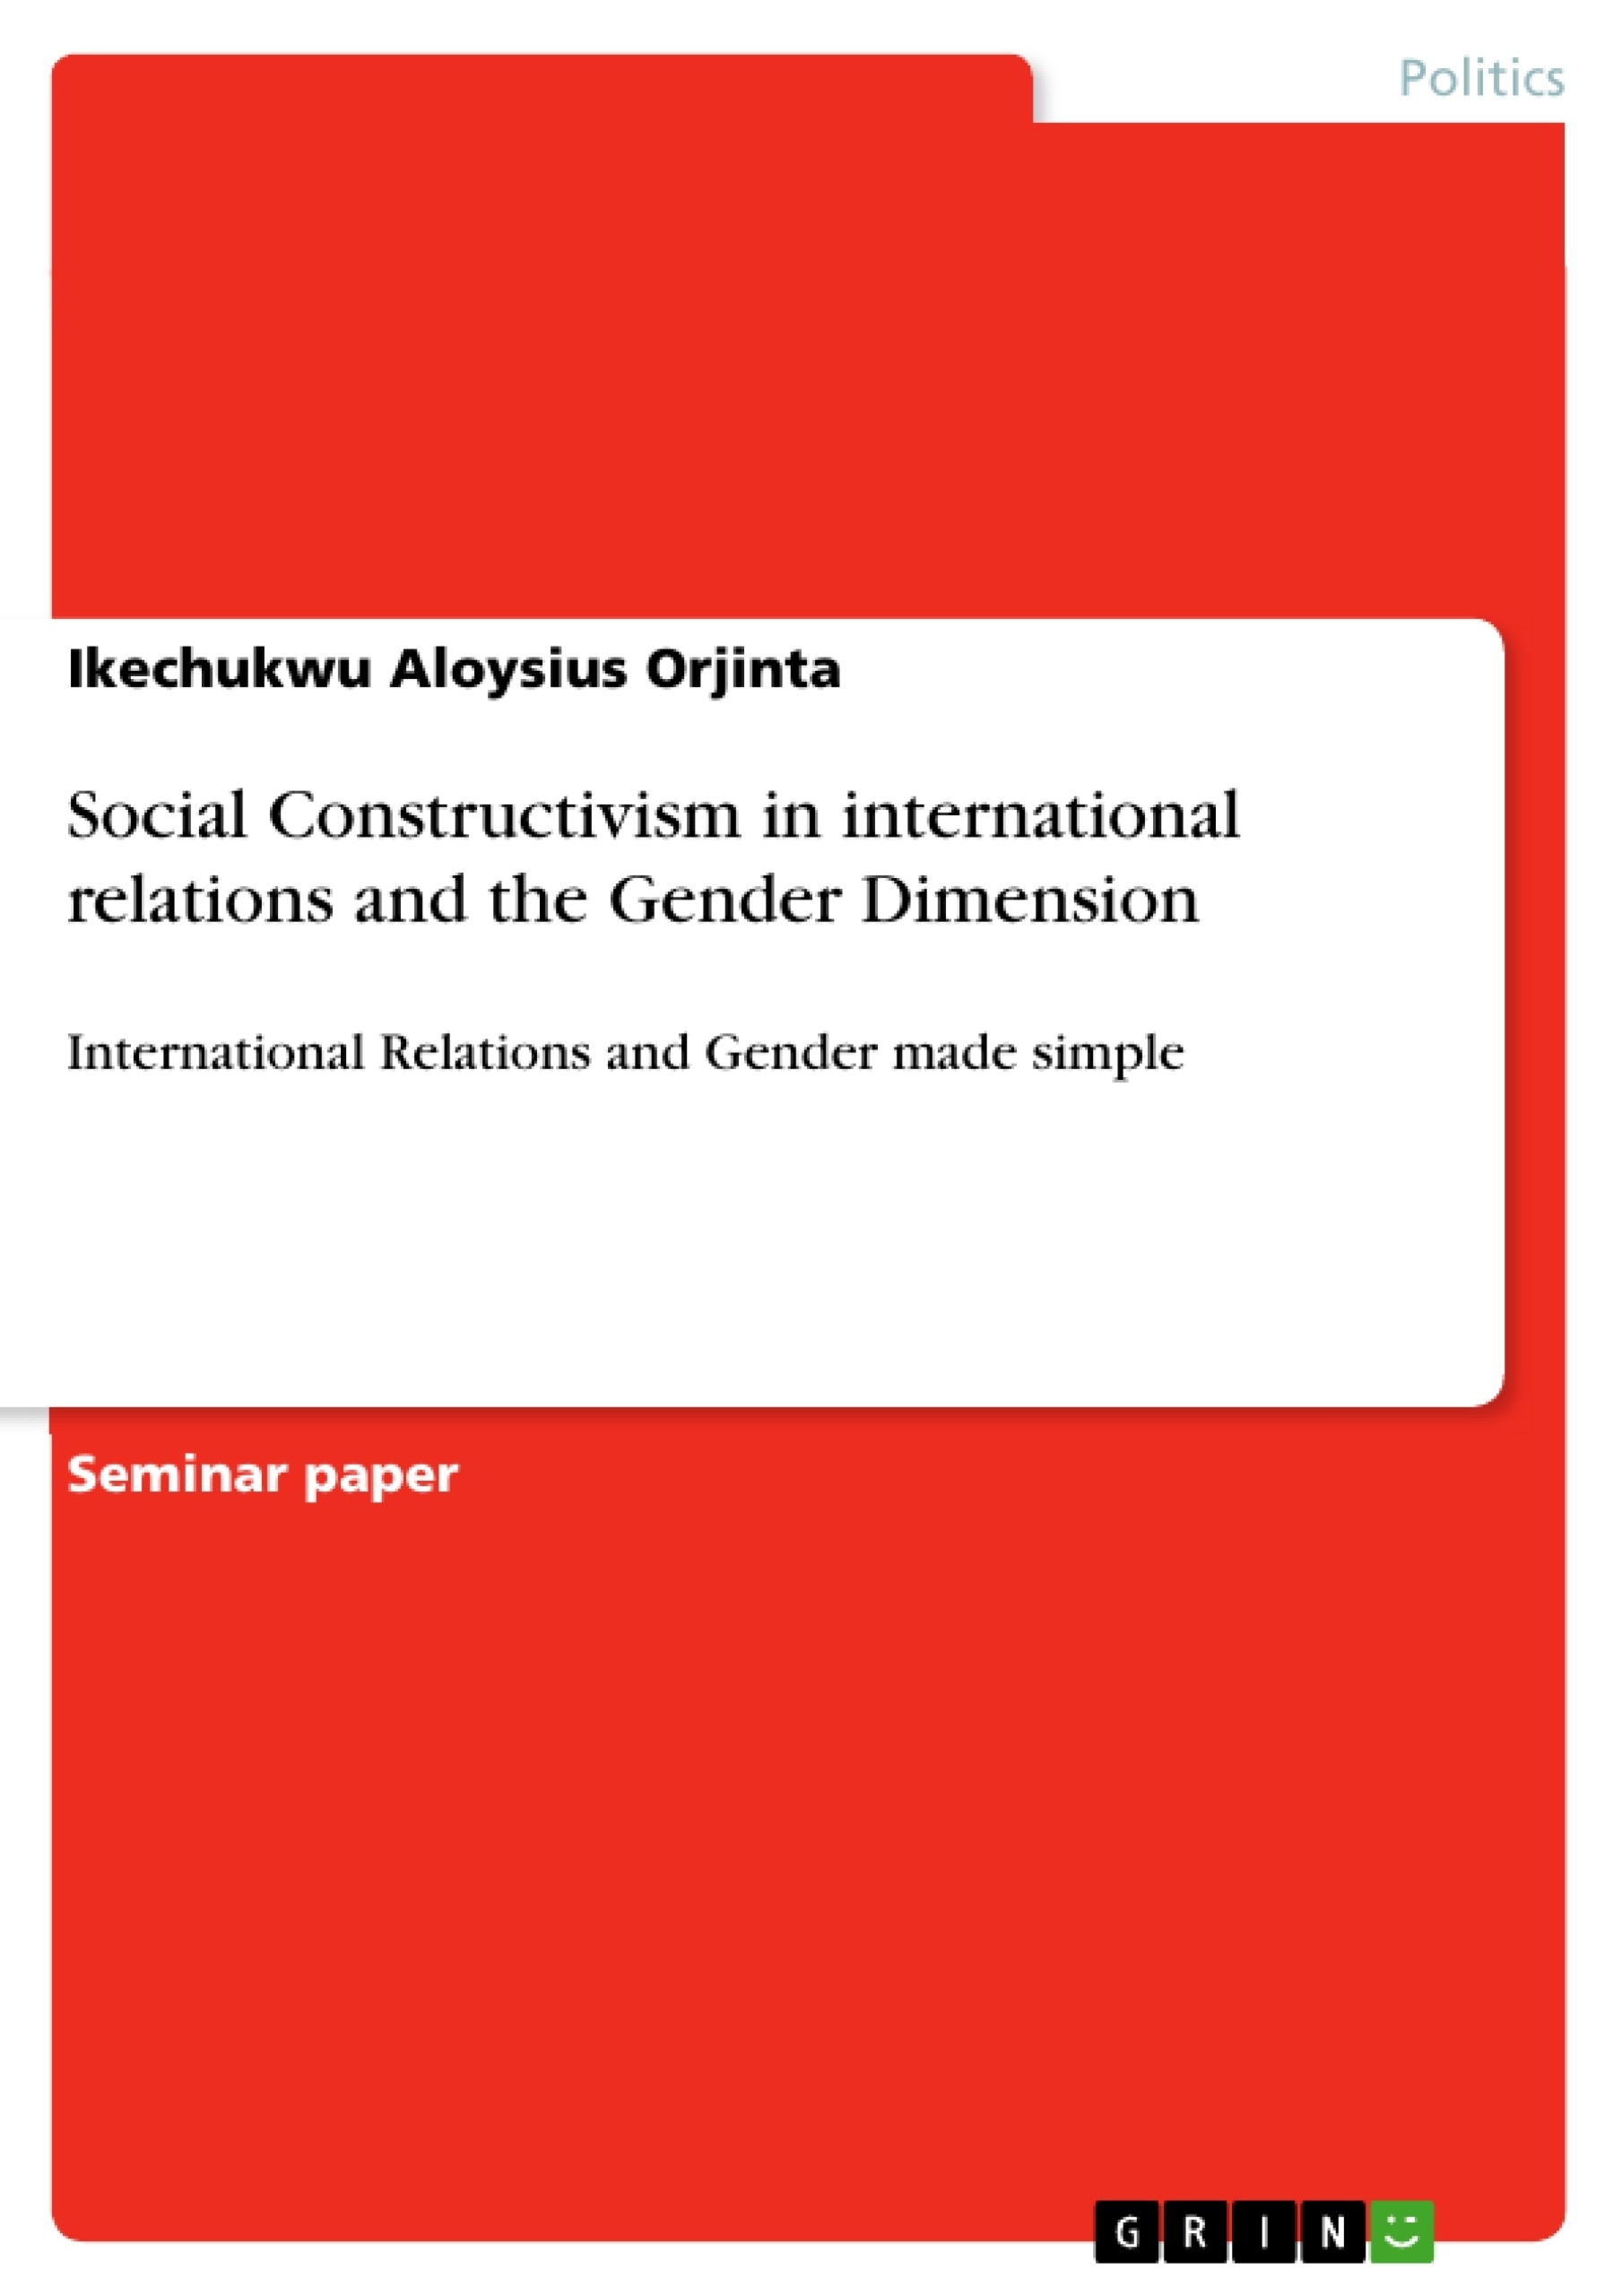 Título: Social Constructivism in international relations and the Gender Dimension